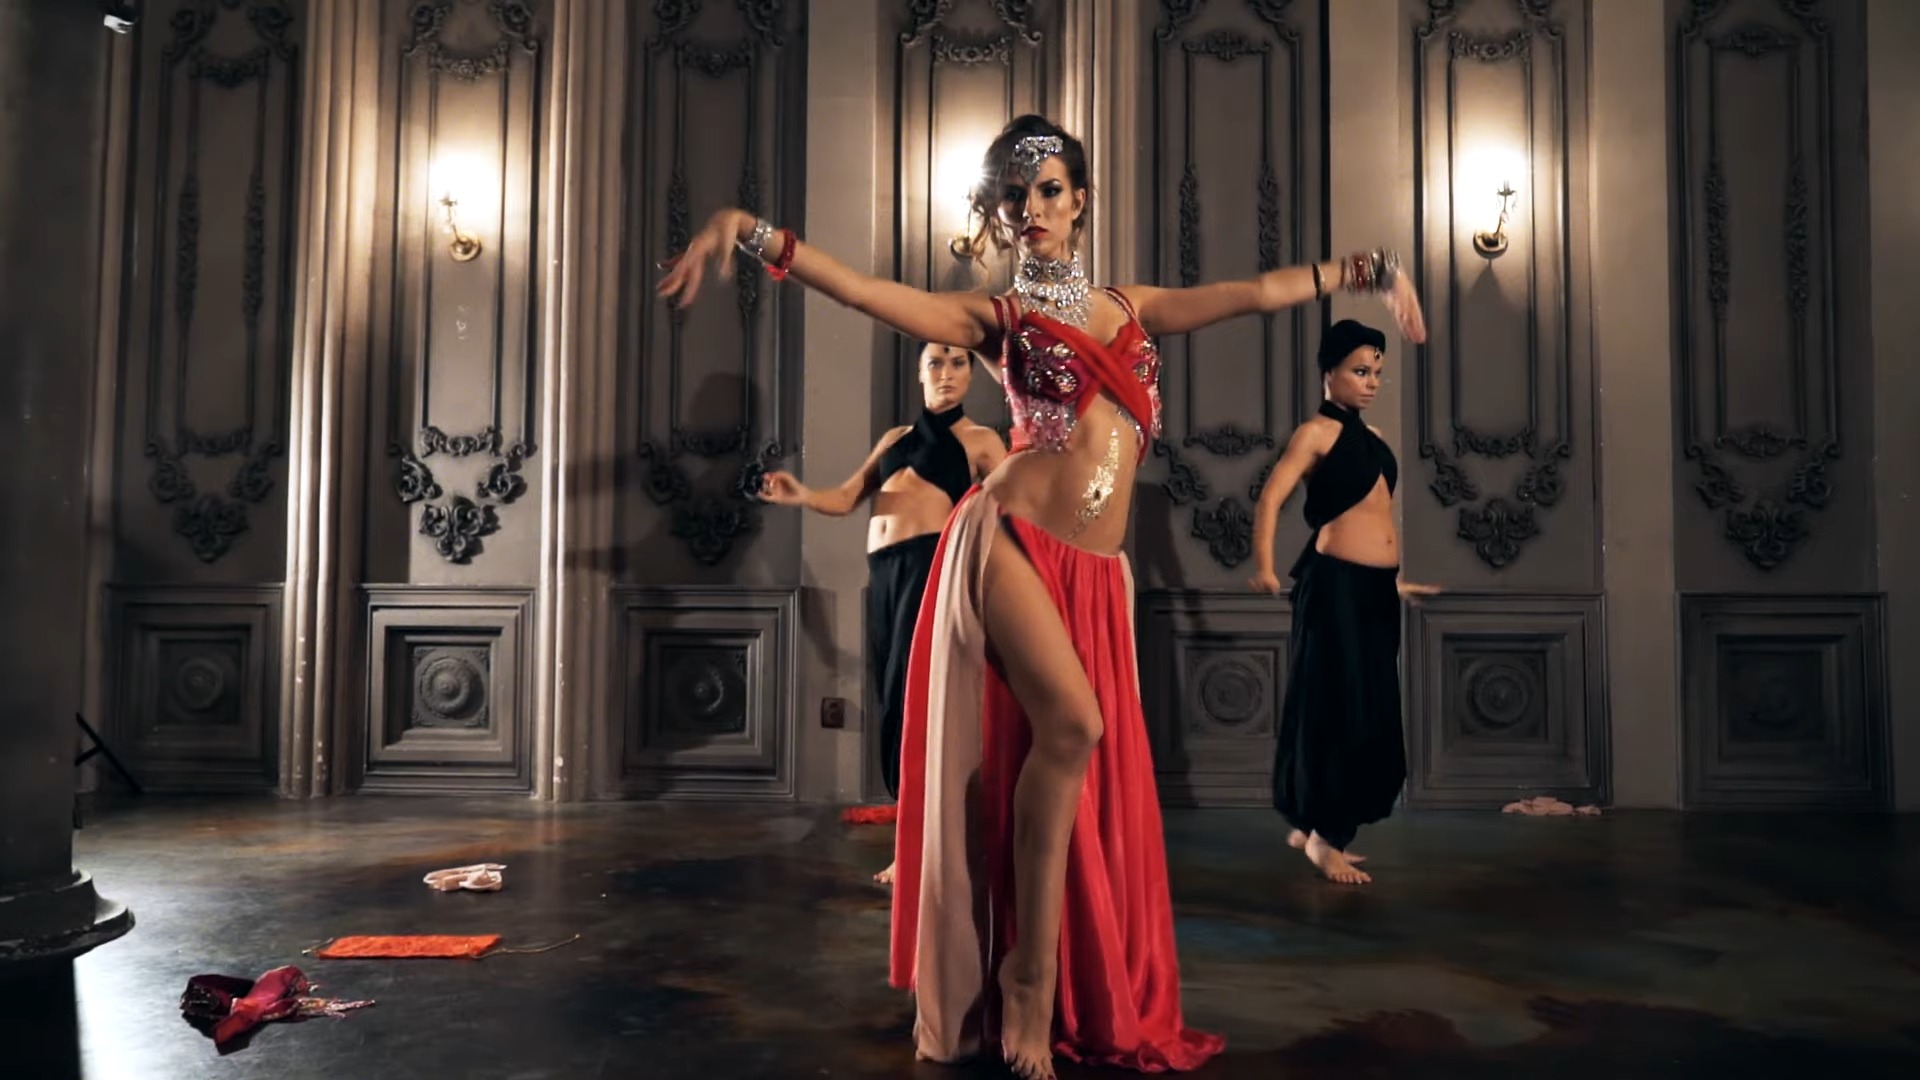 Beautiful woman in a red oriental dress dancing in a dark room with two other women in the background